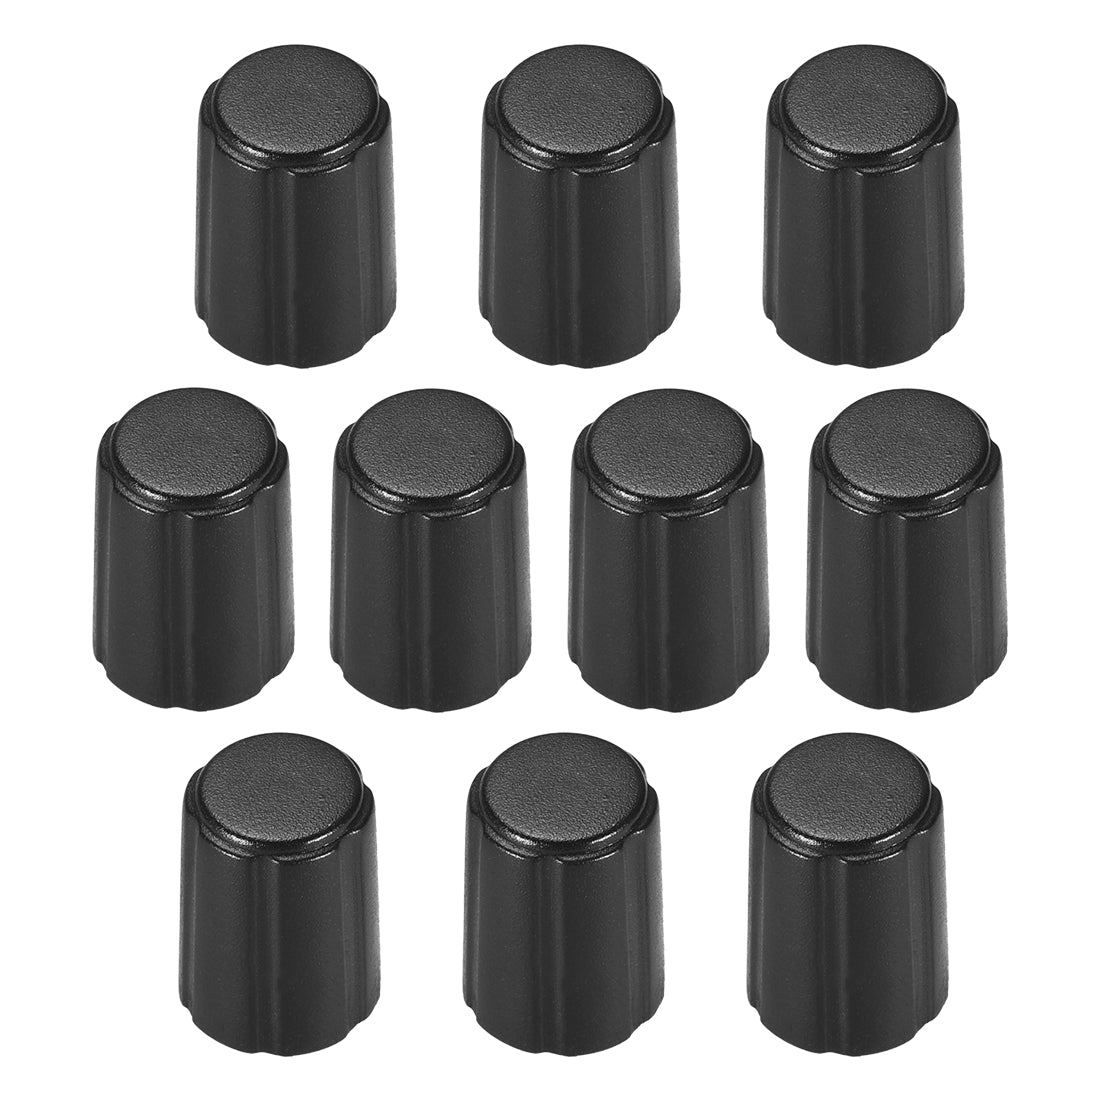 uxcell Uxcell 10pcs,4x6mm Potentiometer Control Knobs for Electric Guitar Volume Tone Black